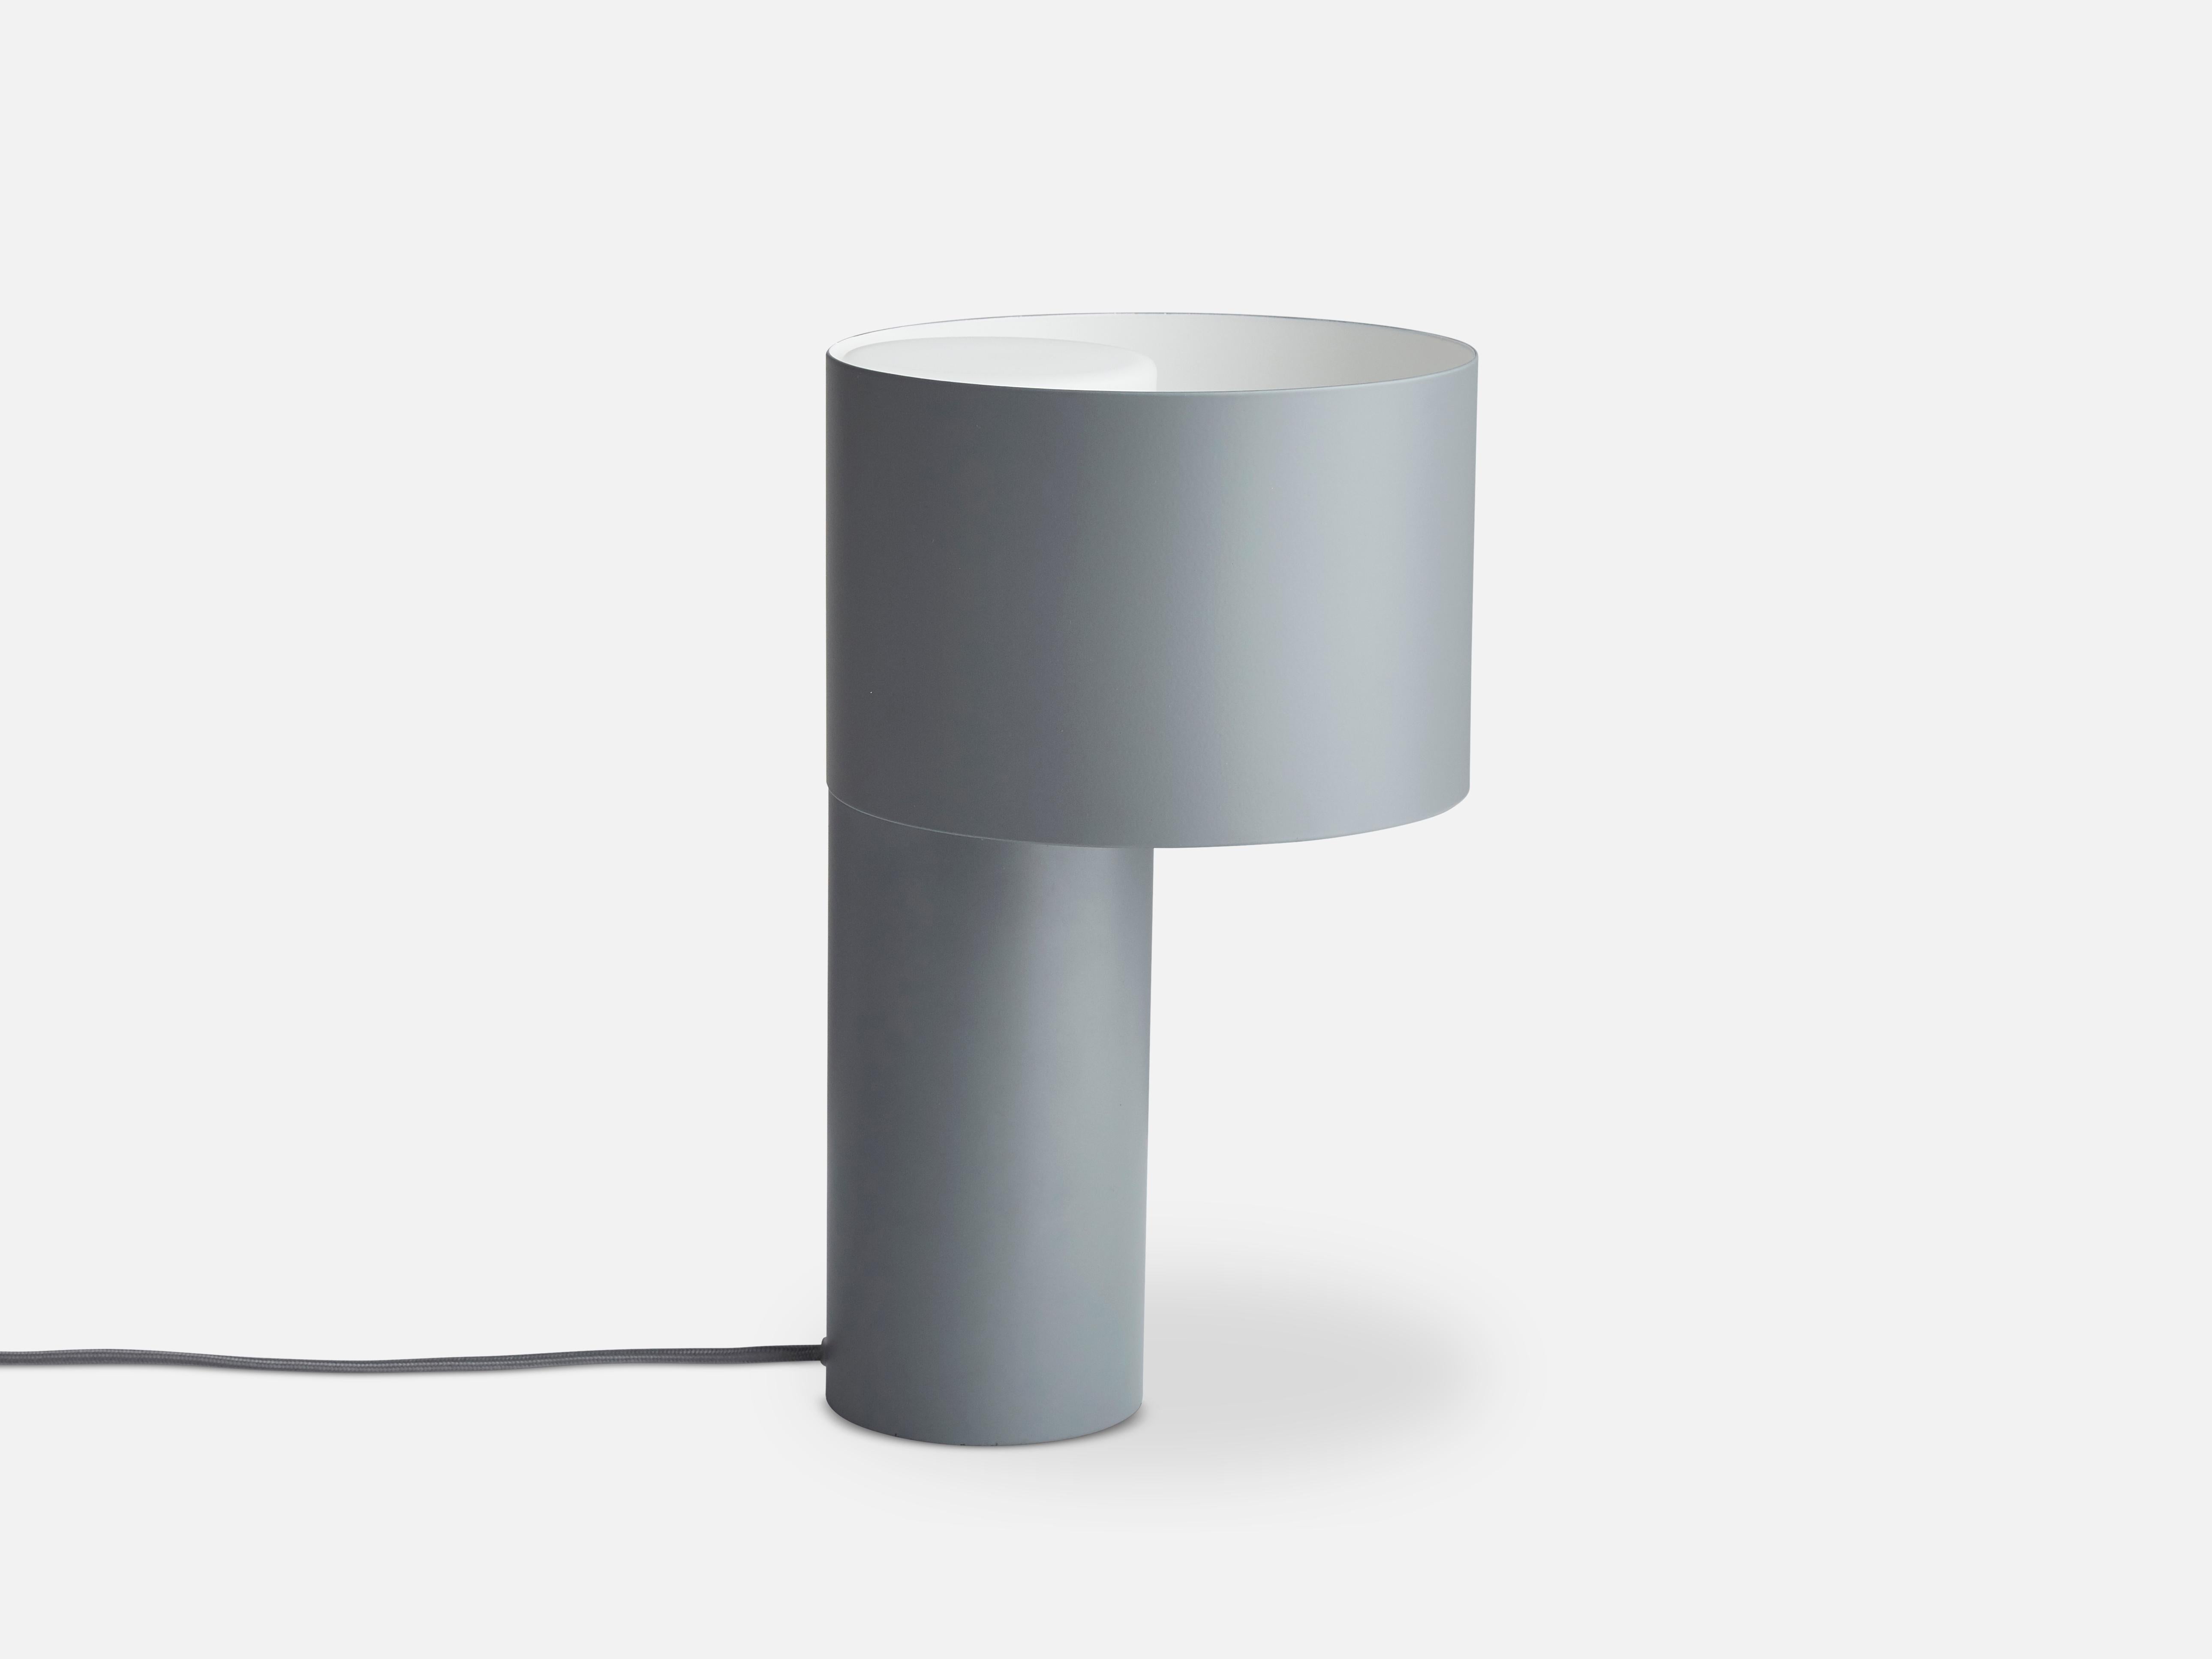 Grey tangent table lamp by Frederik Kurzweg
Materials: Metal, glass.
Dimensions: D 20 x H 34 cm
Available in forest green, desert sand and cool grey.

Frederik Kurzweg is an upcoming design talent born in Germany. His background as a trained